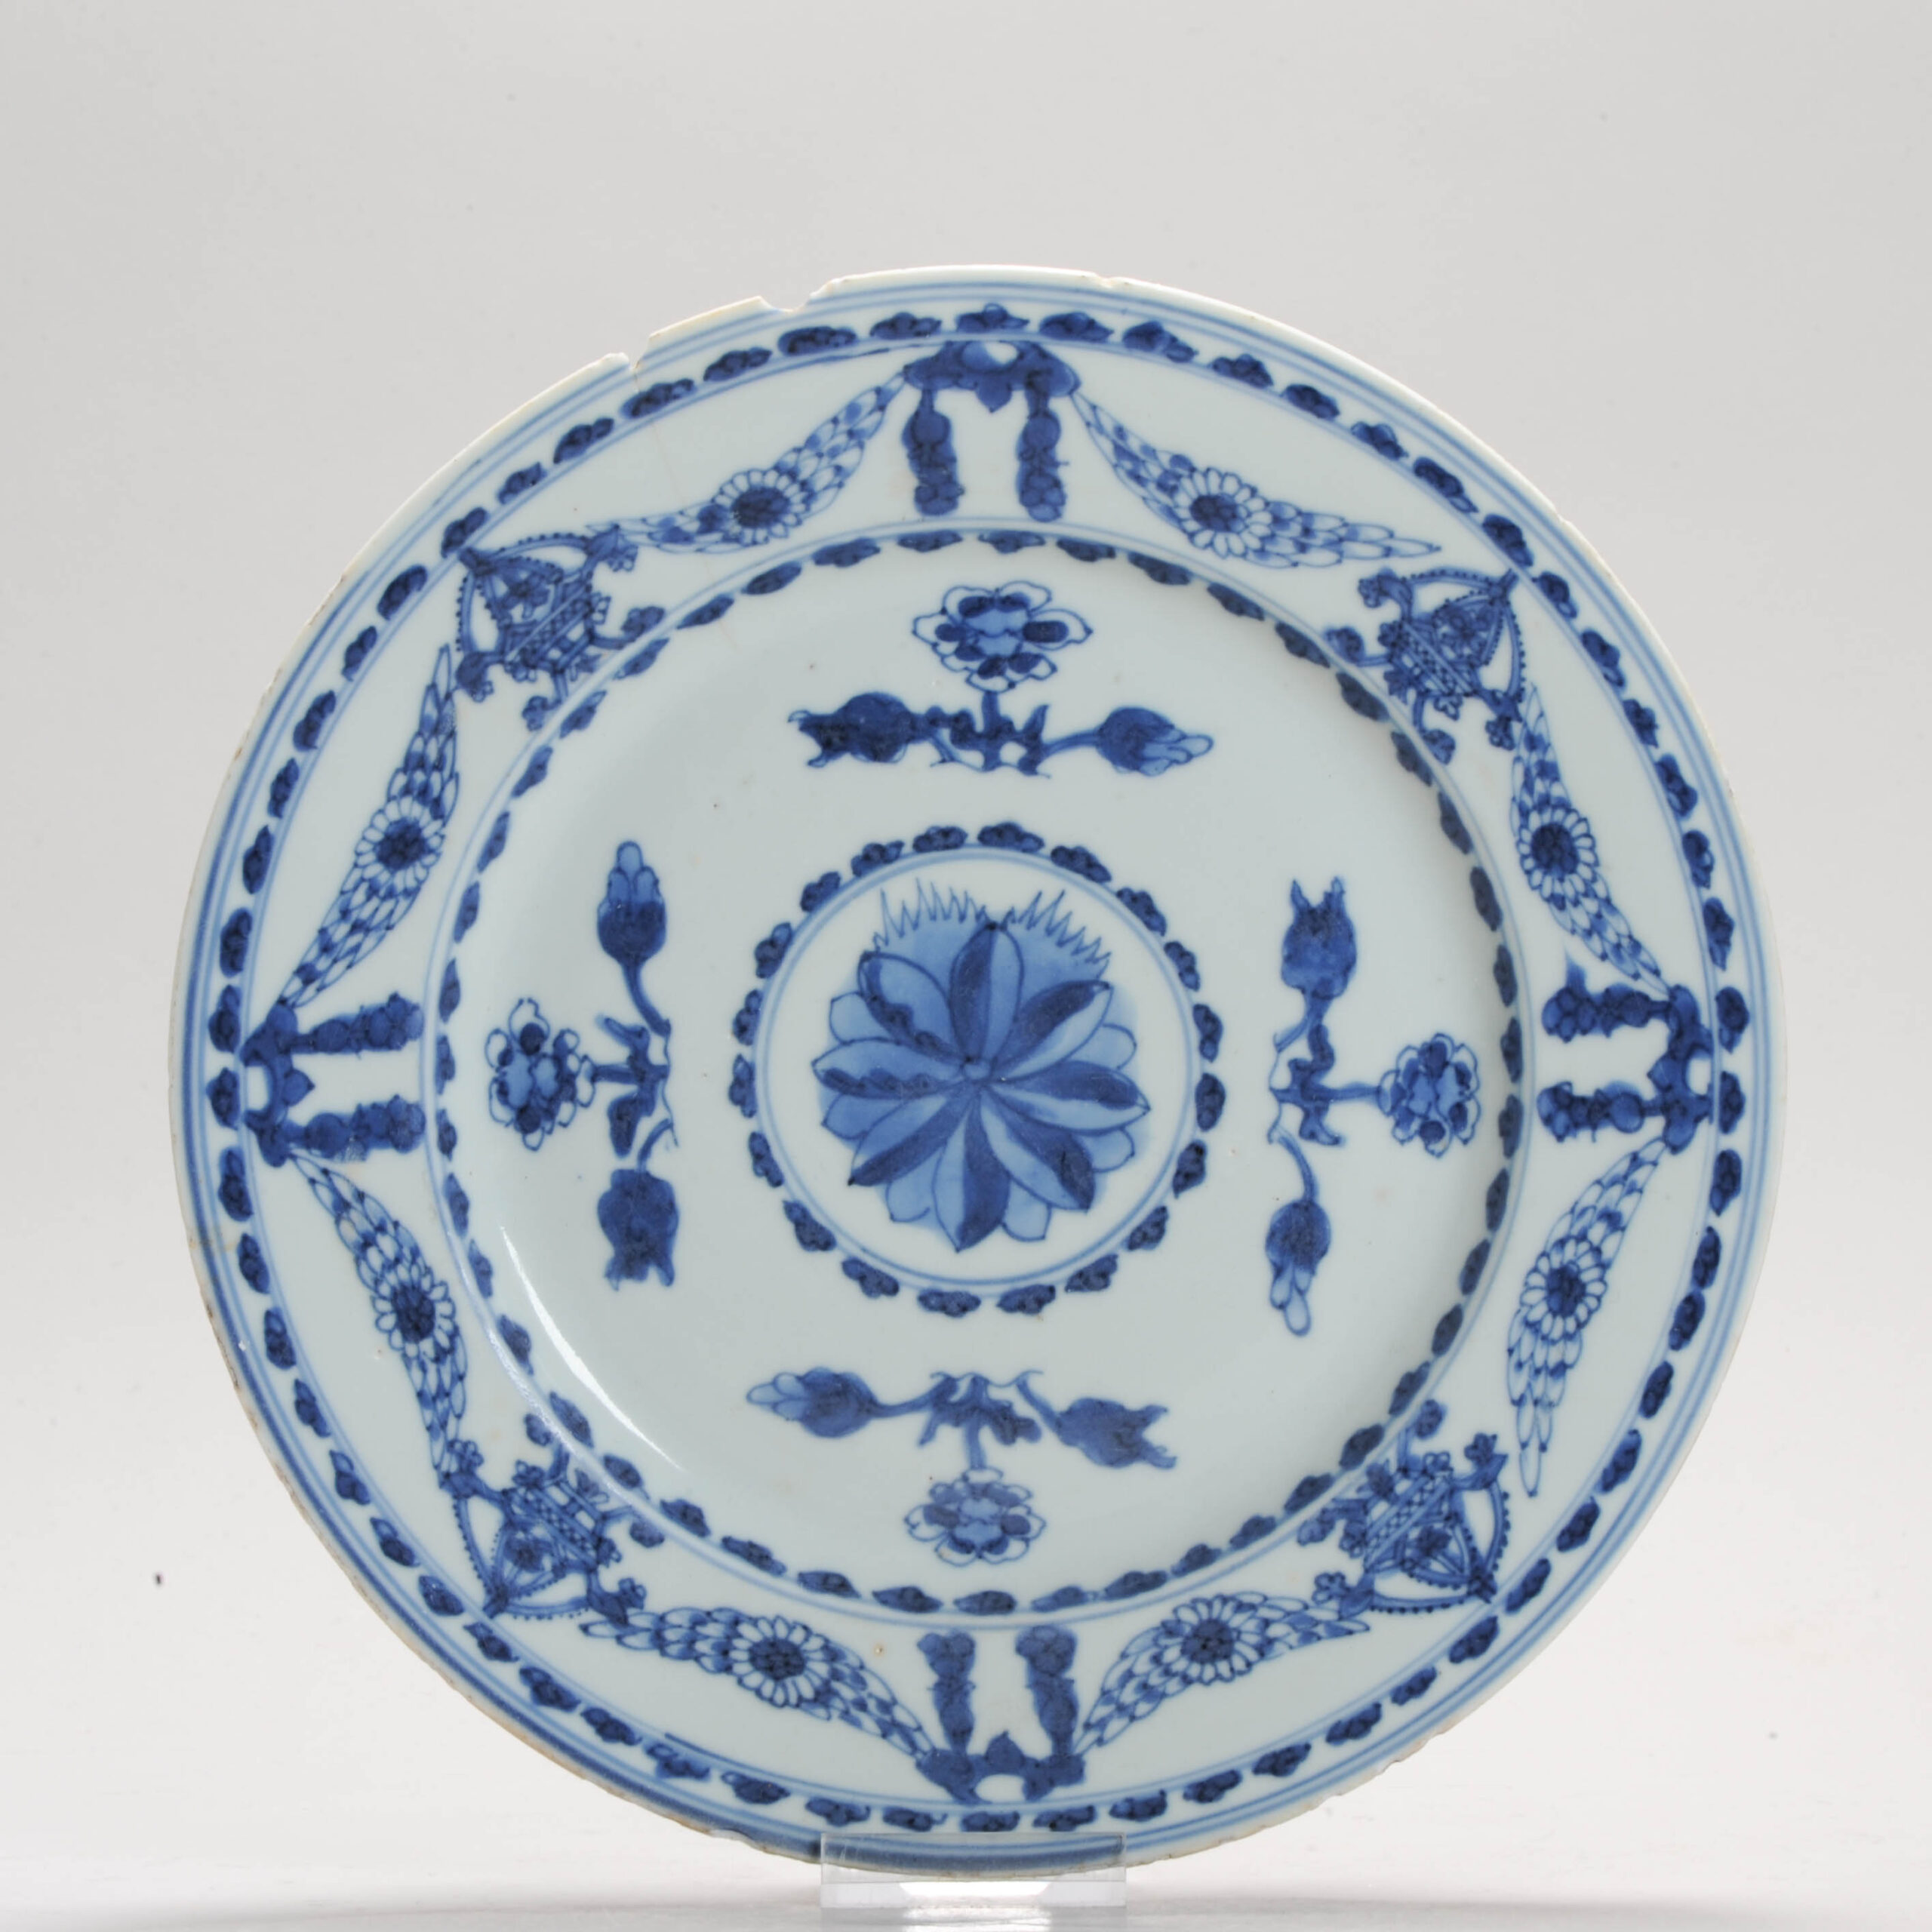 Antique Plate 18th Century Chinese Porcelain Blue and White Flower Kangxi Yongzheng